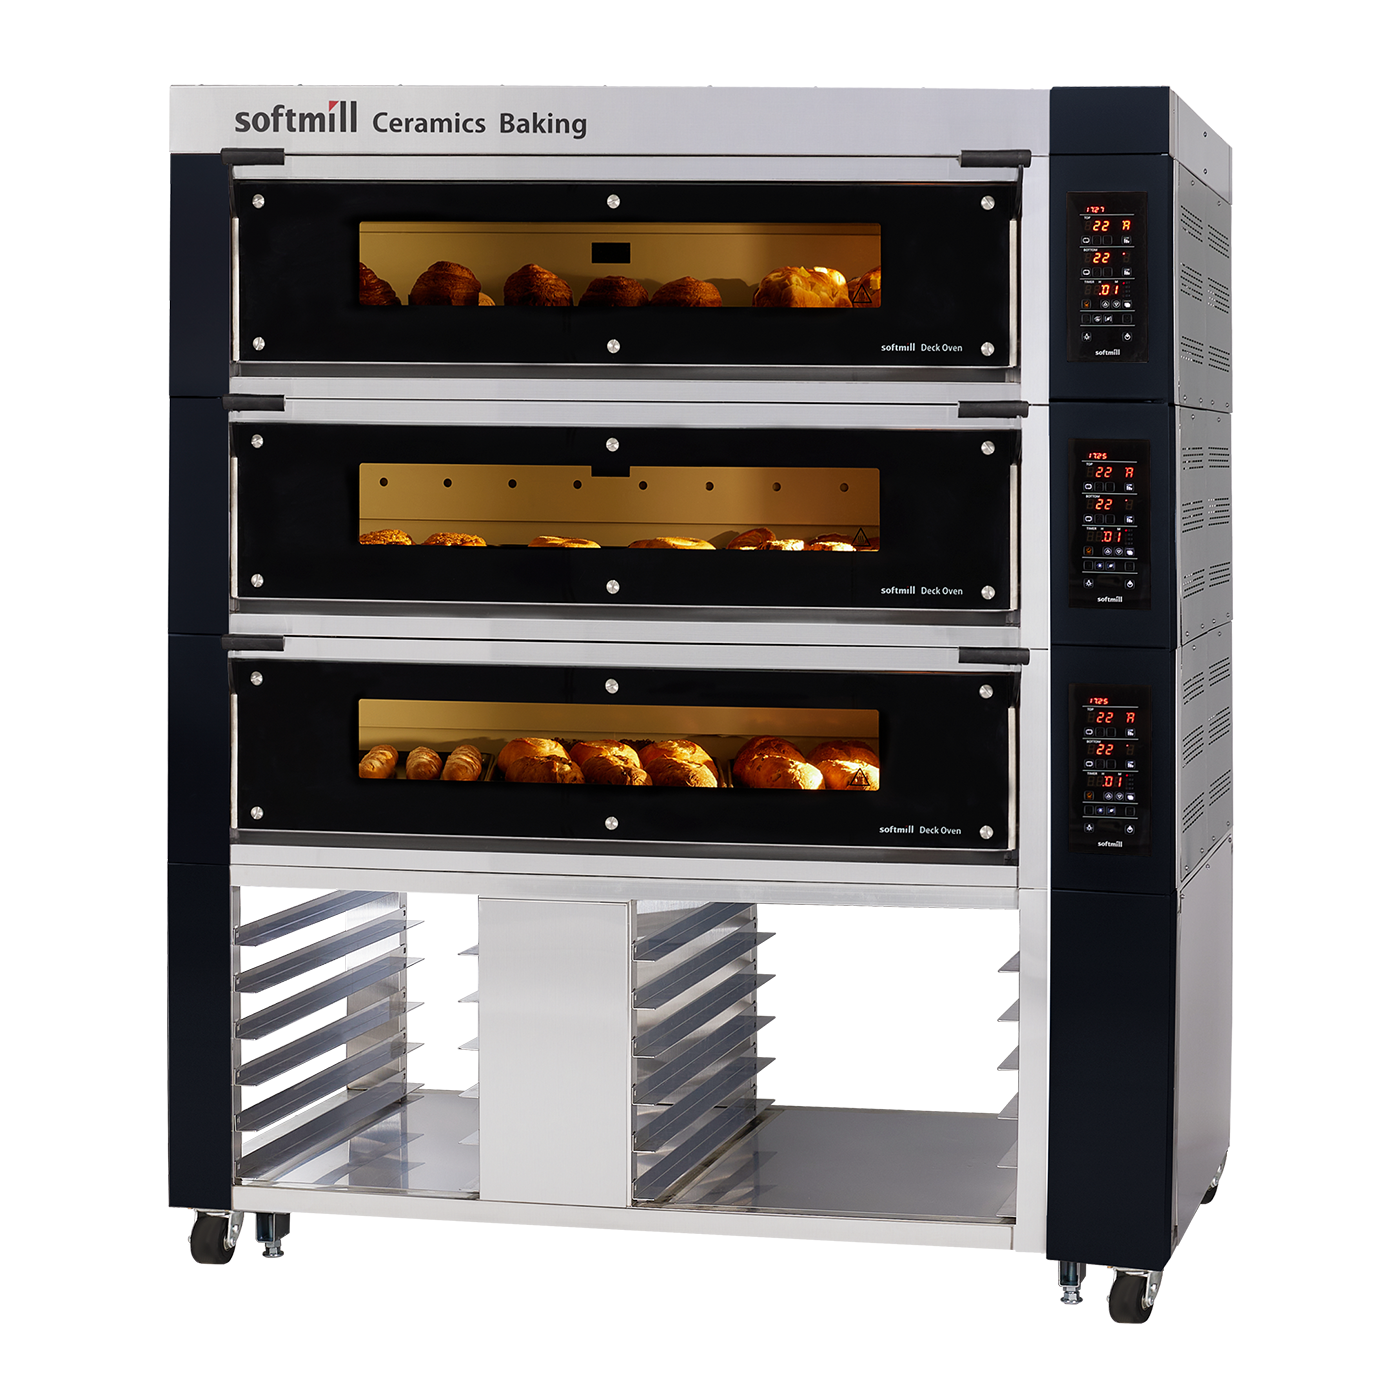 Middle Ceramic Oven 3 trays 3 tiers detail page link